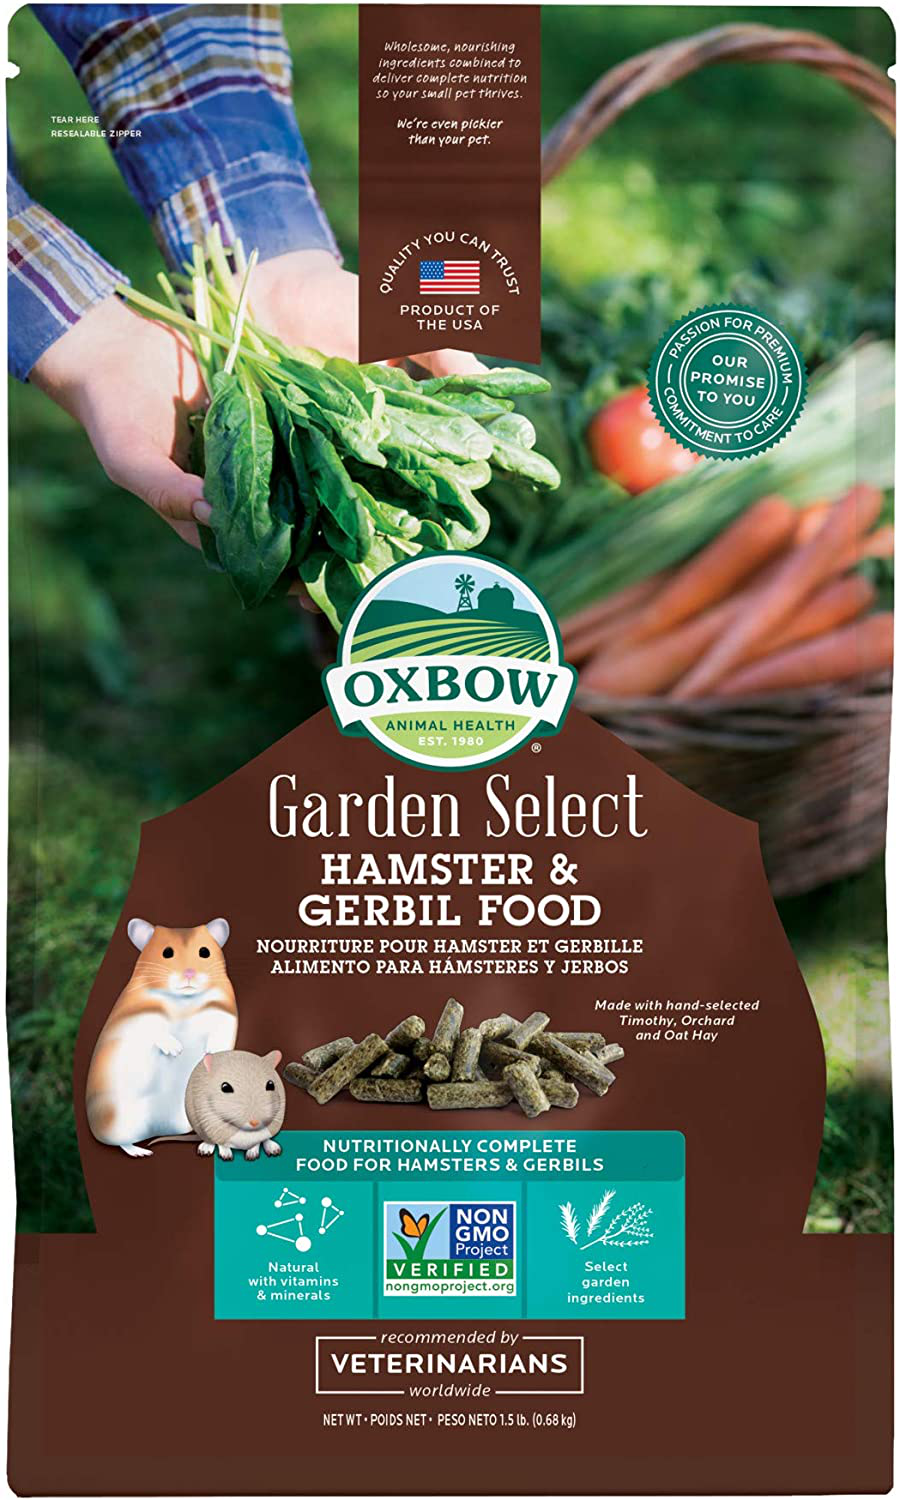 Oxbow Animal Health Garden Select Hamster and Gerbil Food, Garden-Inspired Recipe for Hamsters and Gerbils, Non-Gmo, Made in the USA, 1.5 Pound Bag